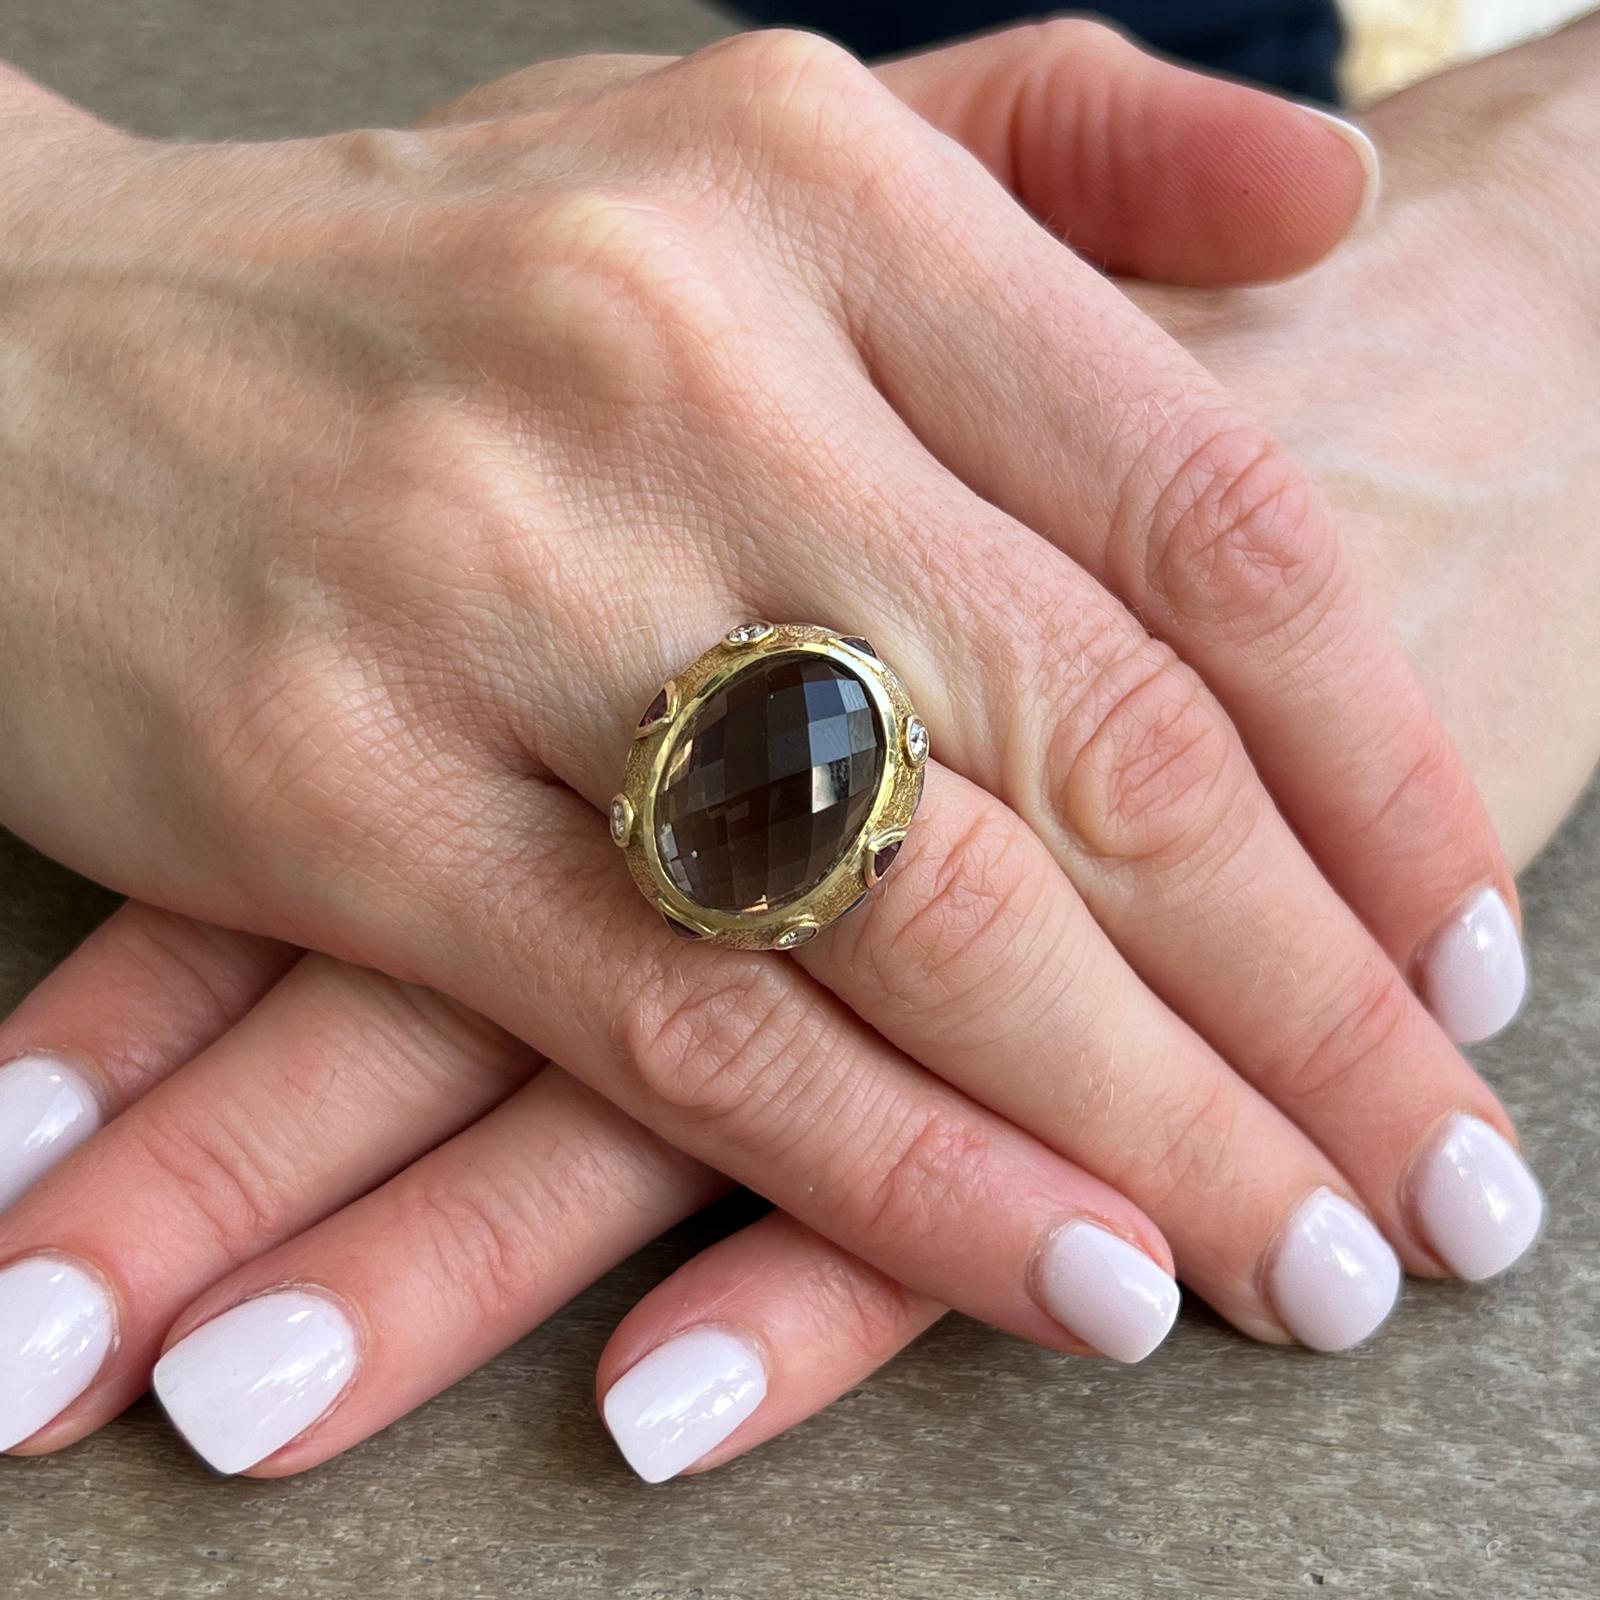 David Yurman Renaissance ring fashioned in sterling silver and 18 karat yellow gold. The cable ring features a faceted oval smokey topaz gemstone set in 18 karat yellow gold. The gold top also features bezel set diamond and garnet accents. The ring